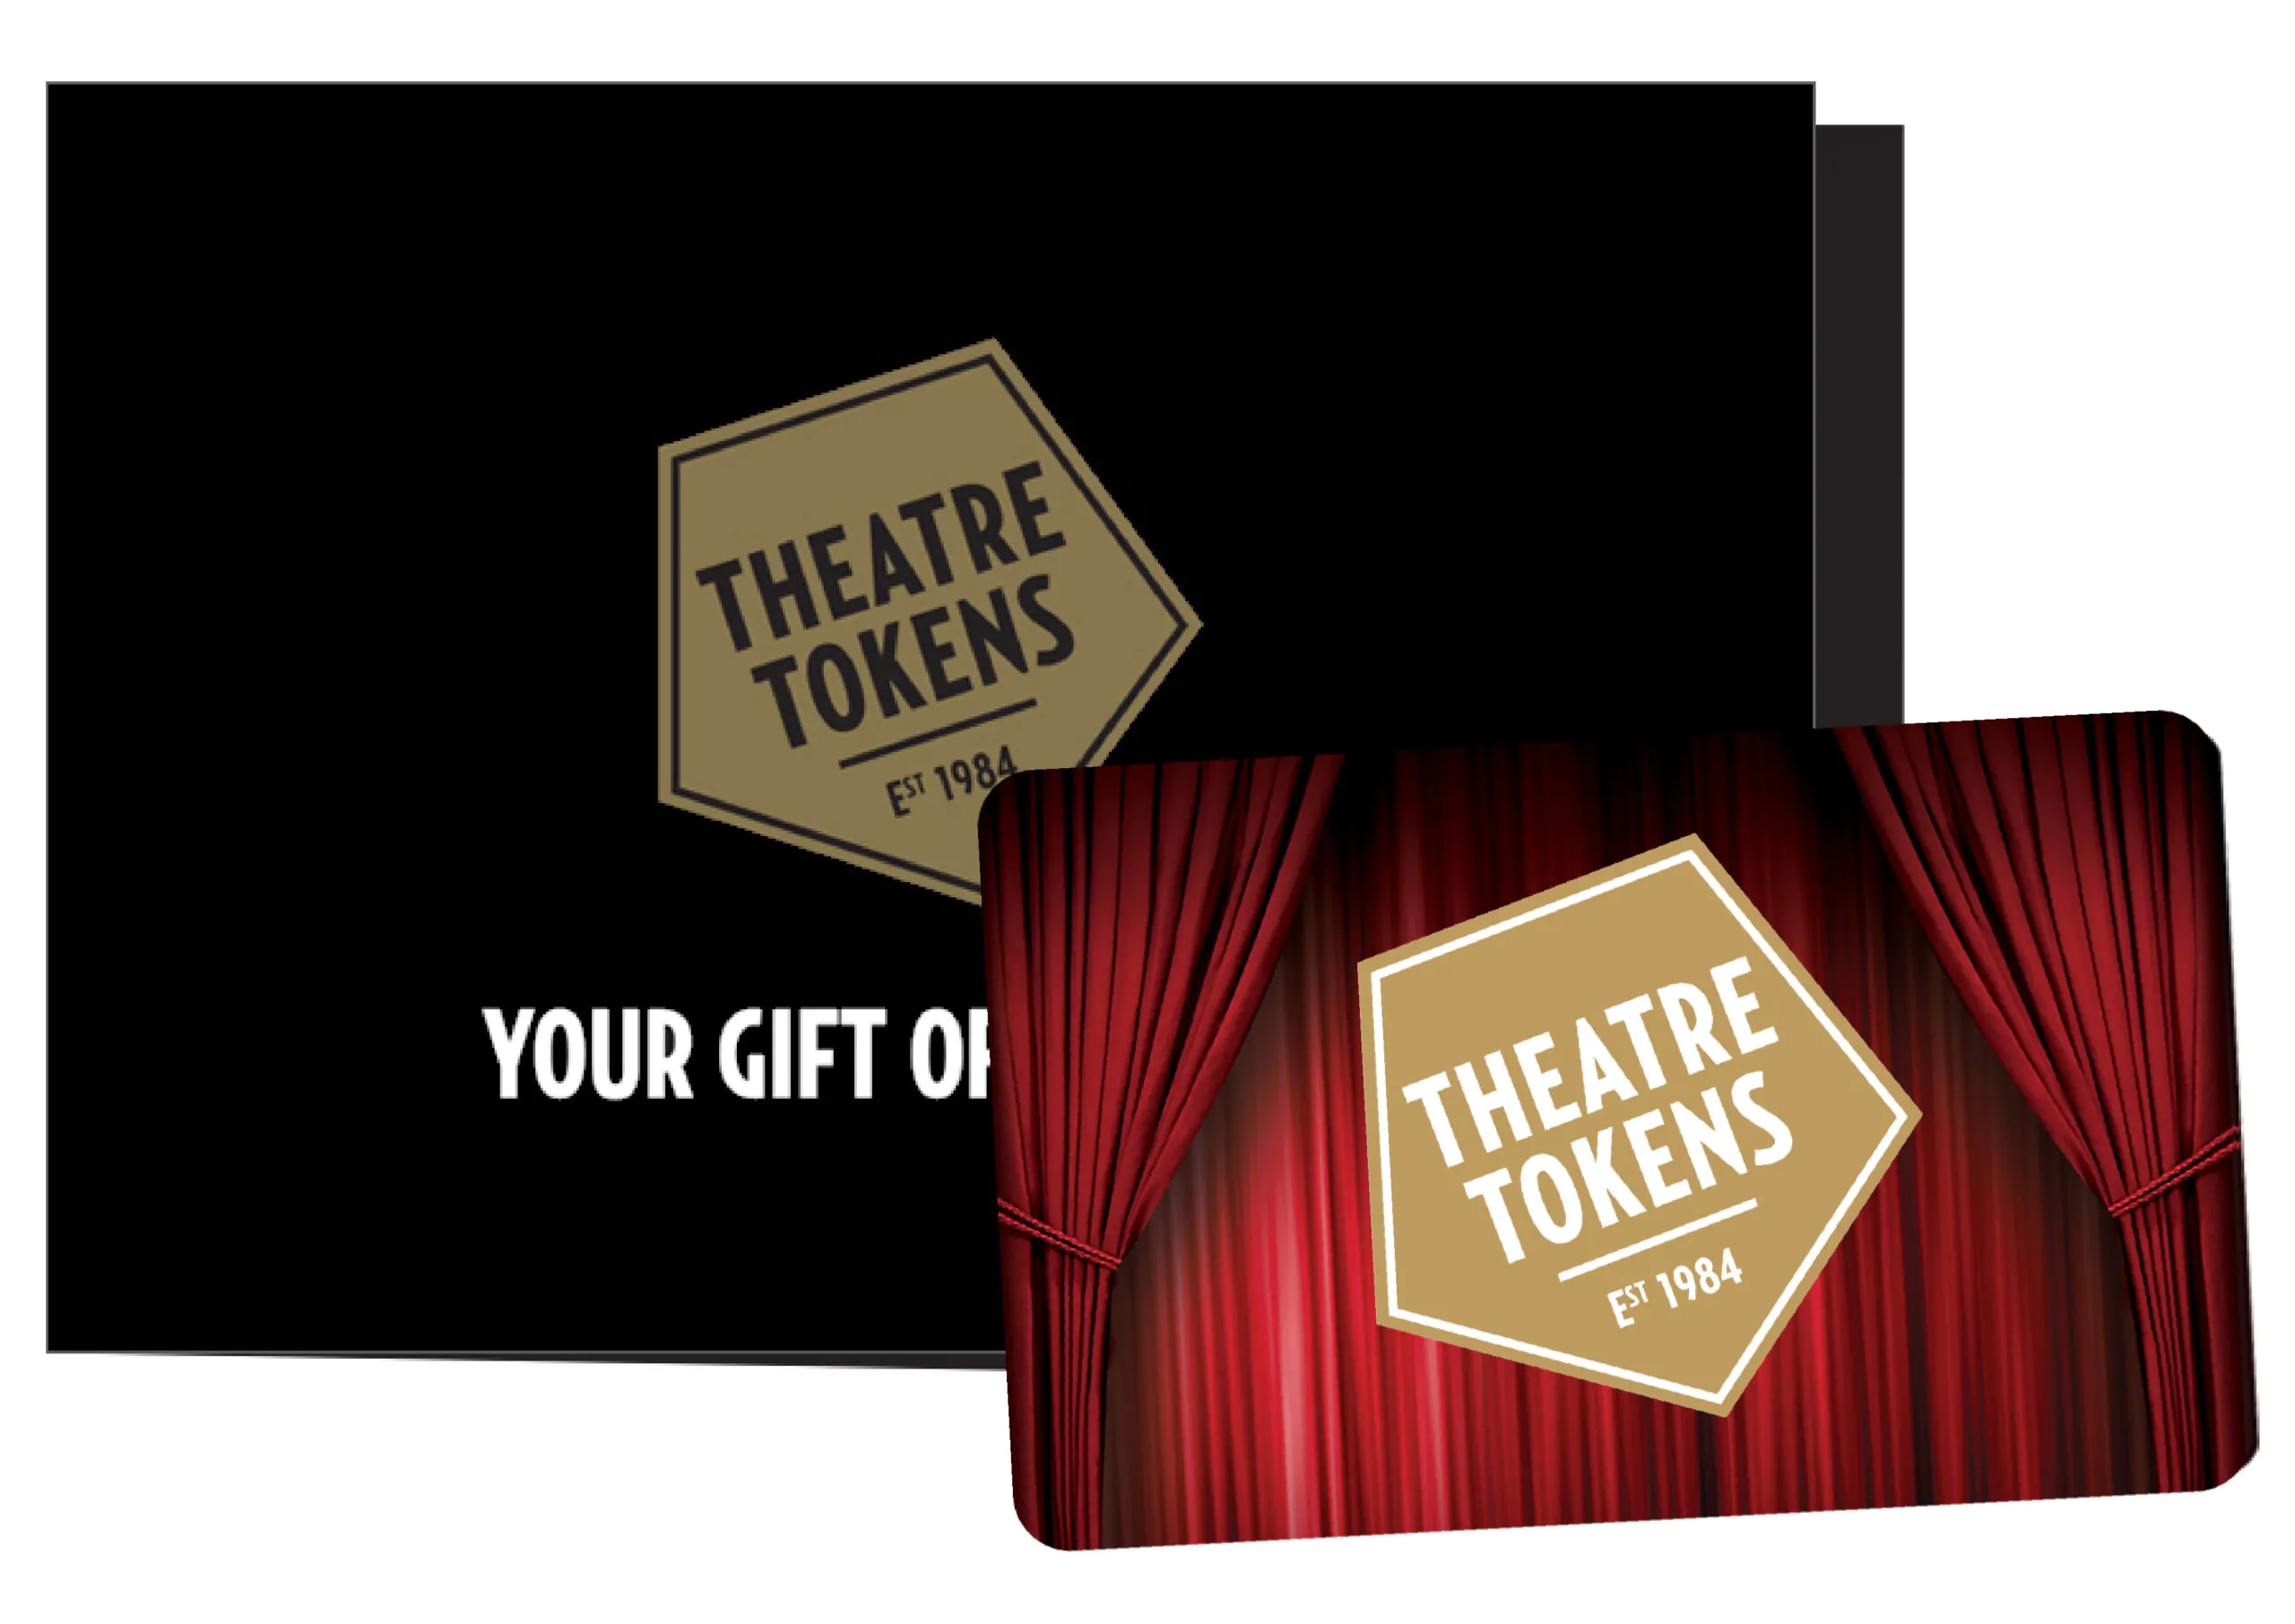 Official London Theatre - Theatre Tokens: Giving the Gift of Theatre